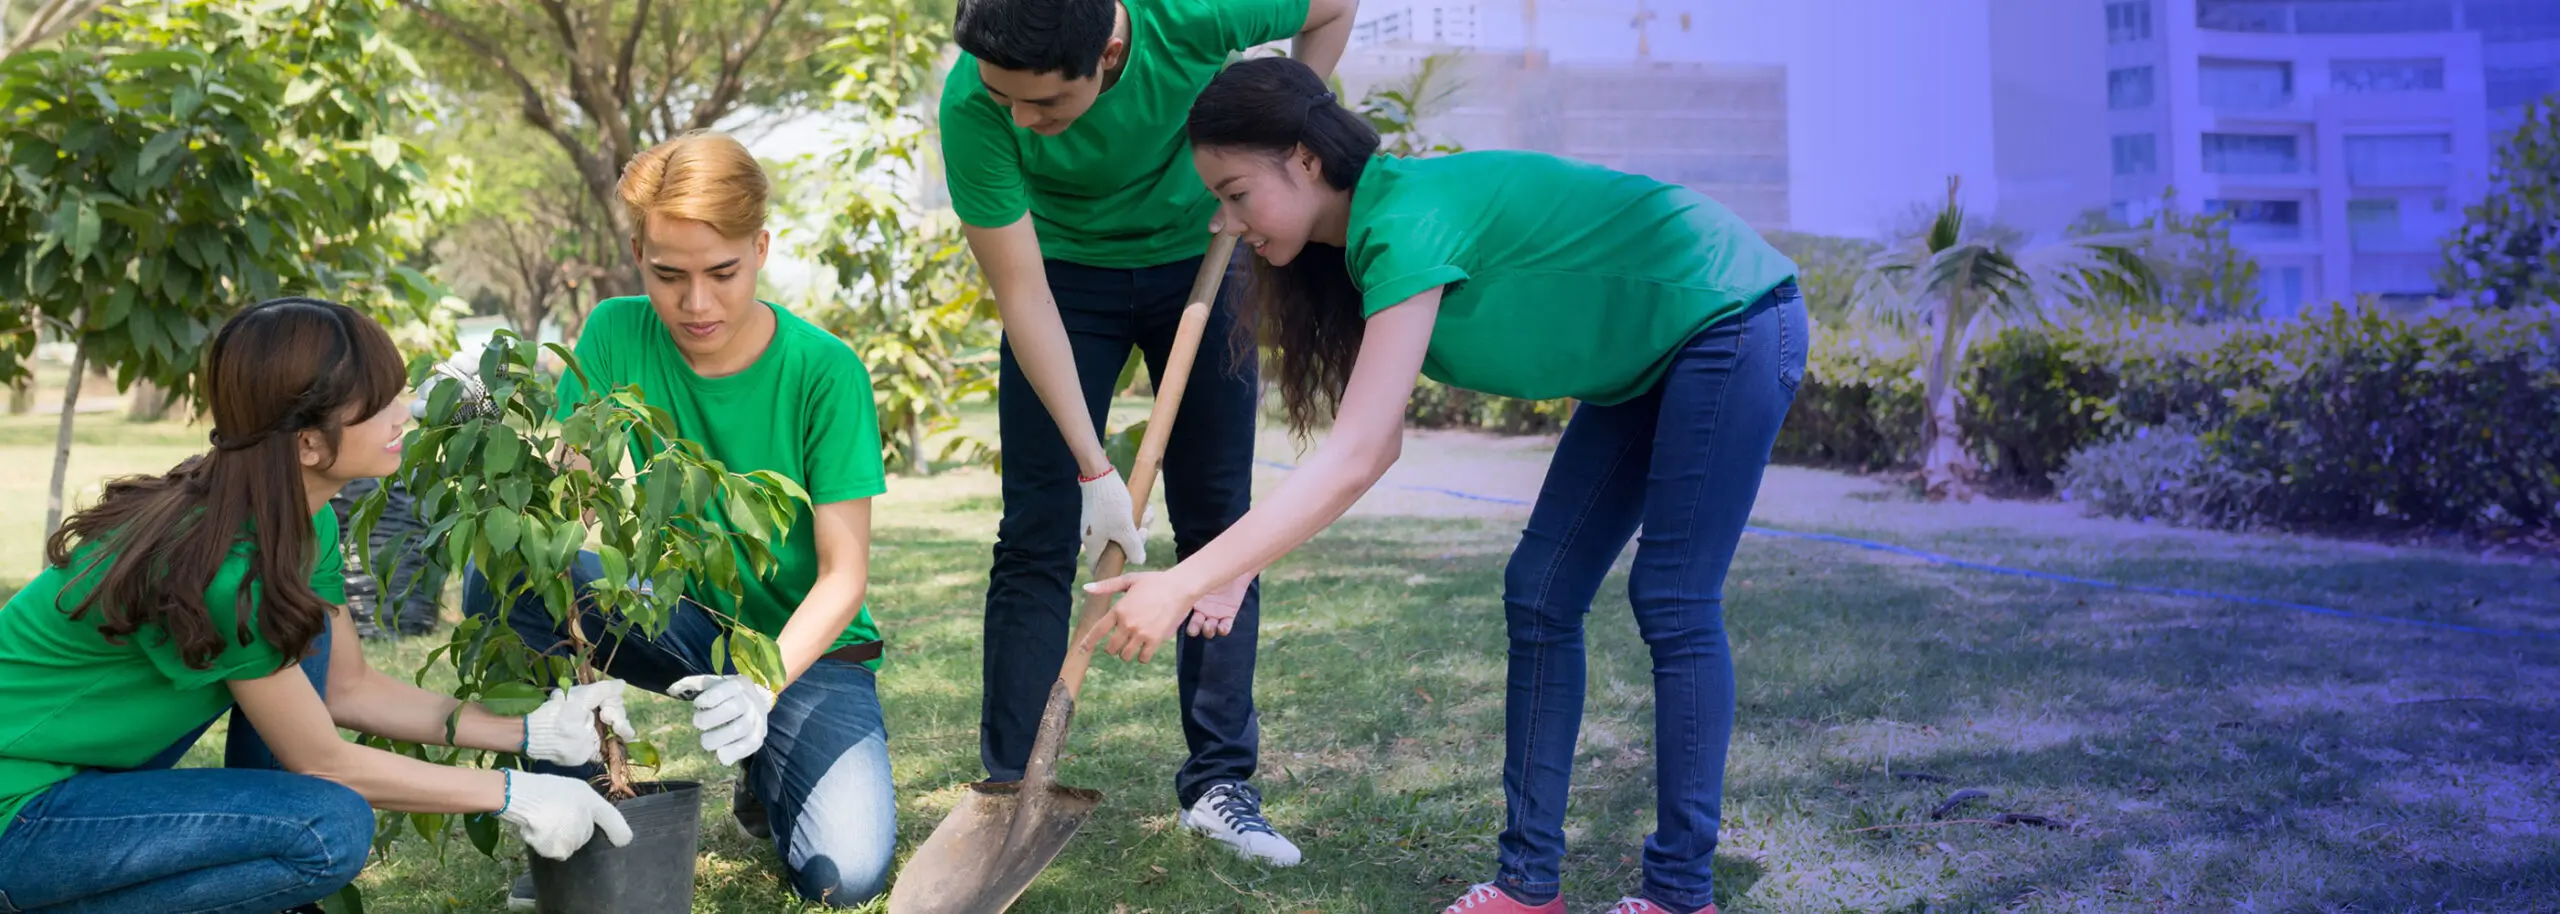 A corporate tree plantation drive at a campus